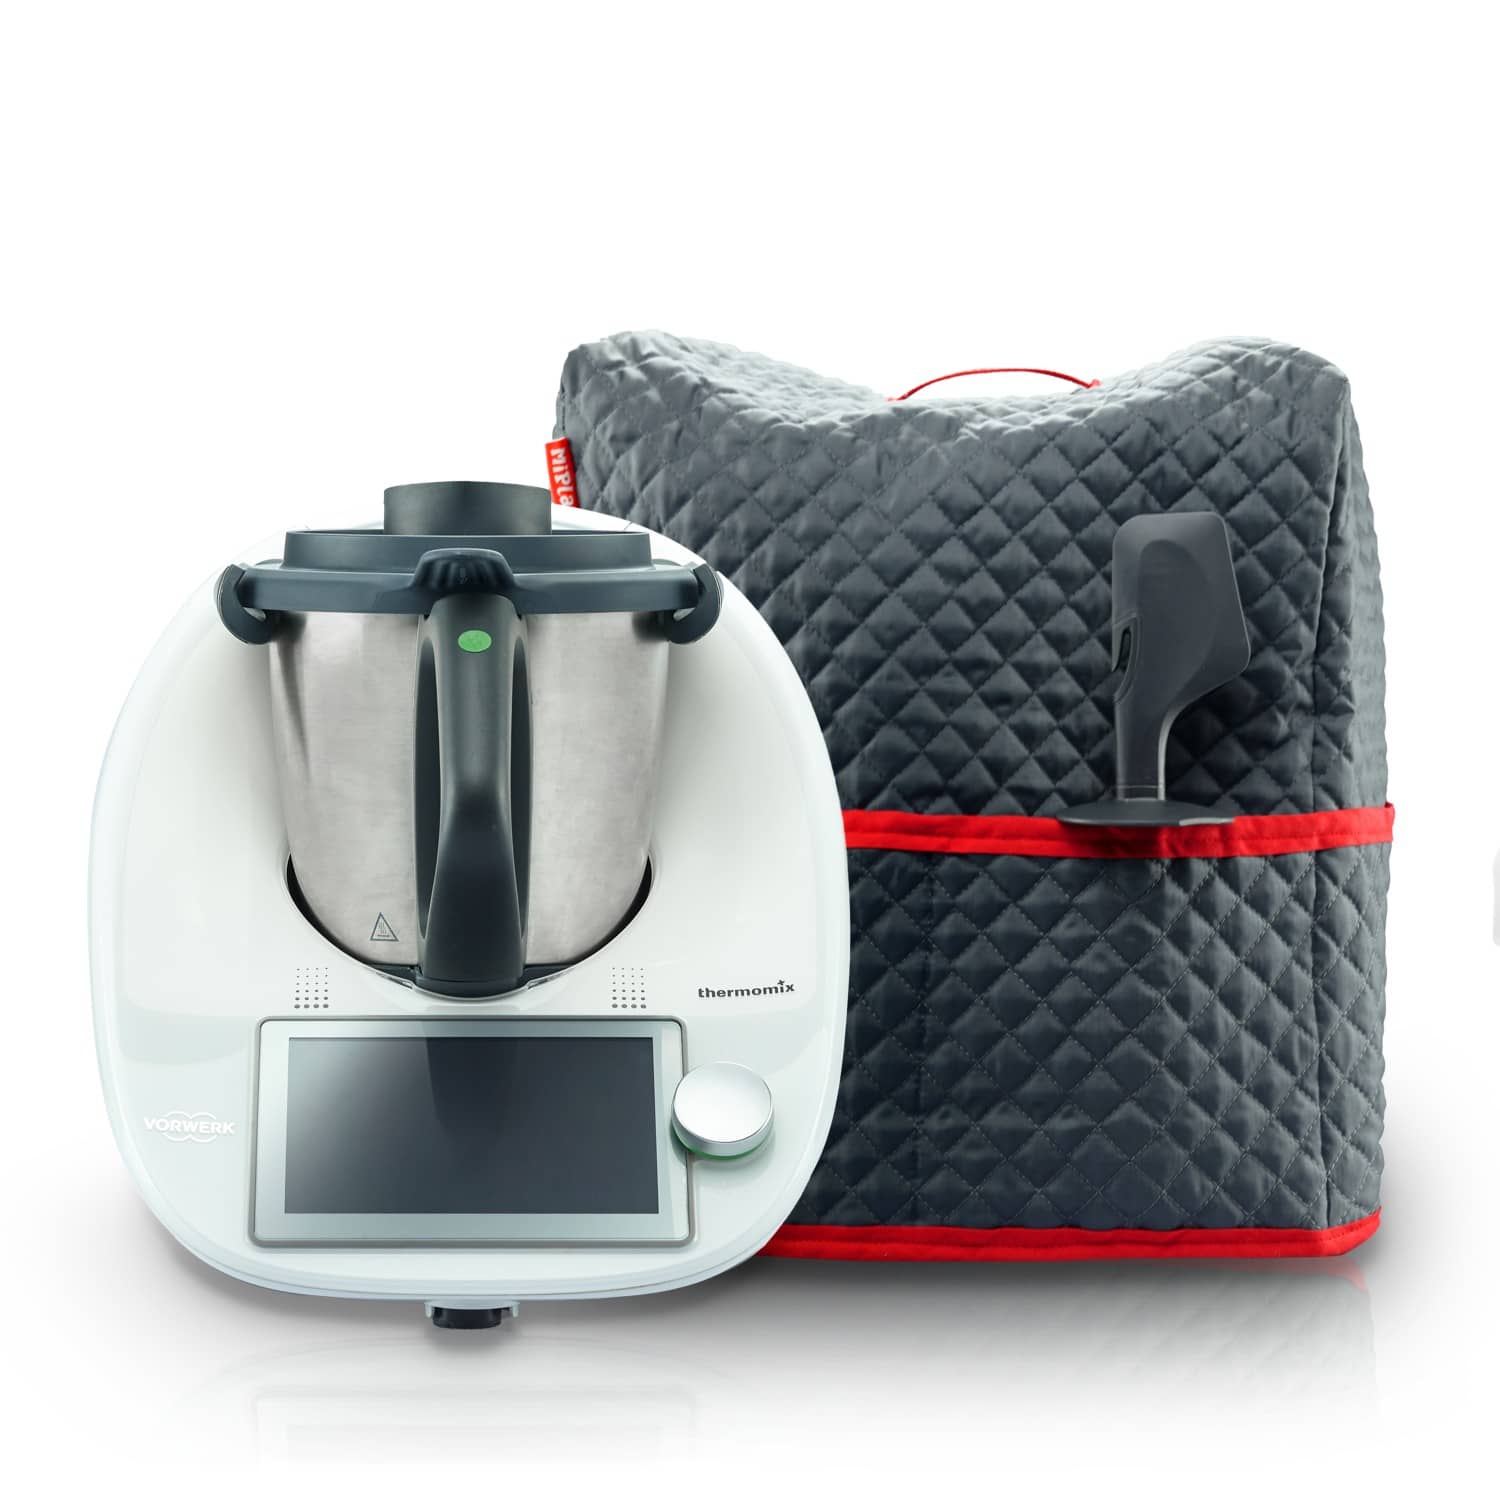 Thermomix Cutter® - Thermomix Benelux Shop en Ligne